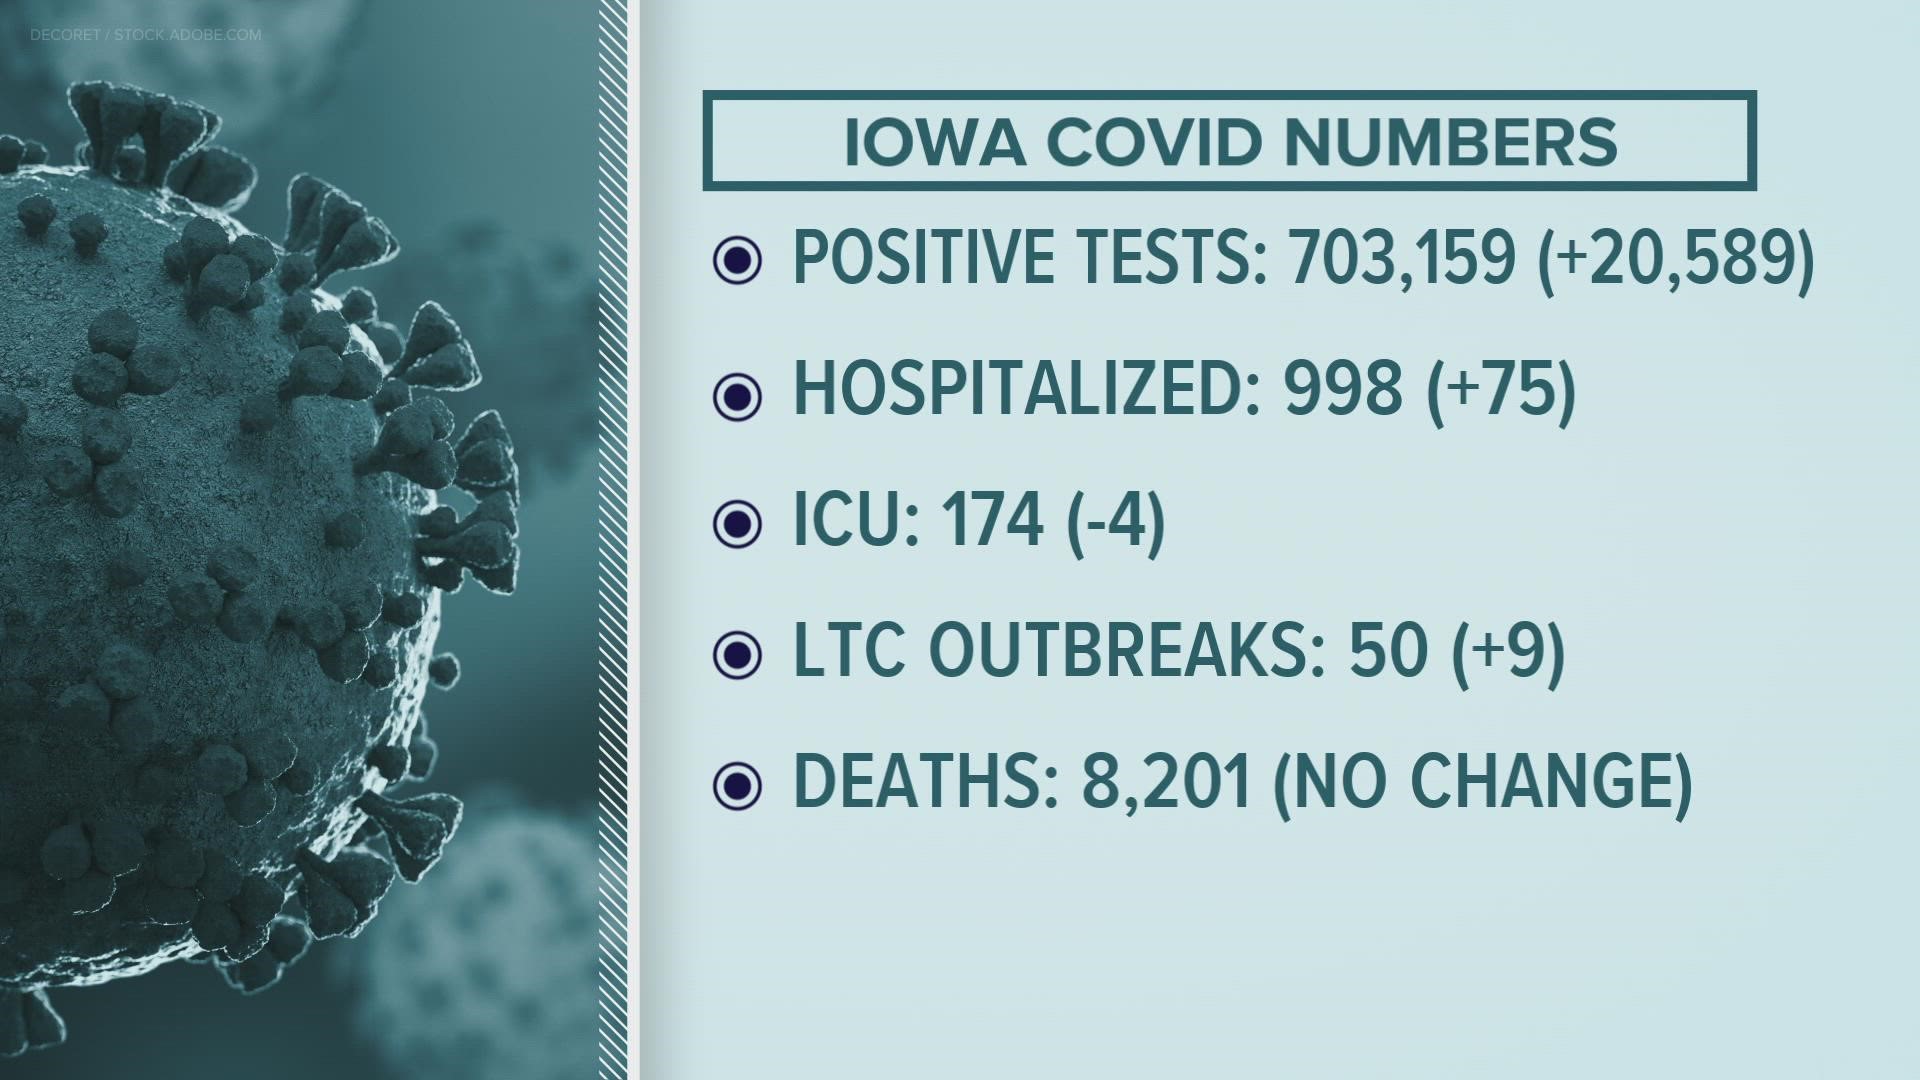 Text FACTS to 515-457-1026 for the latest coronavirus data.